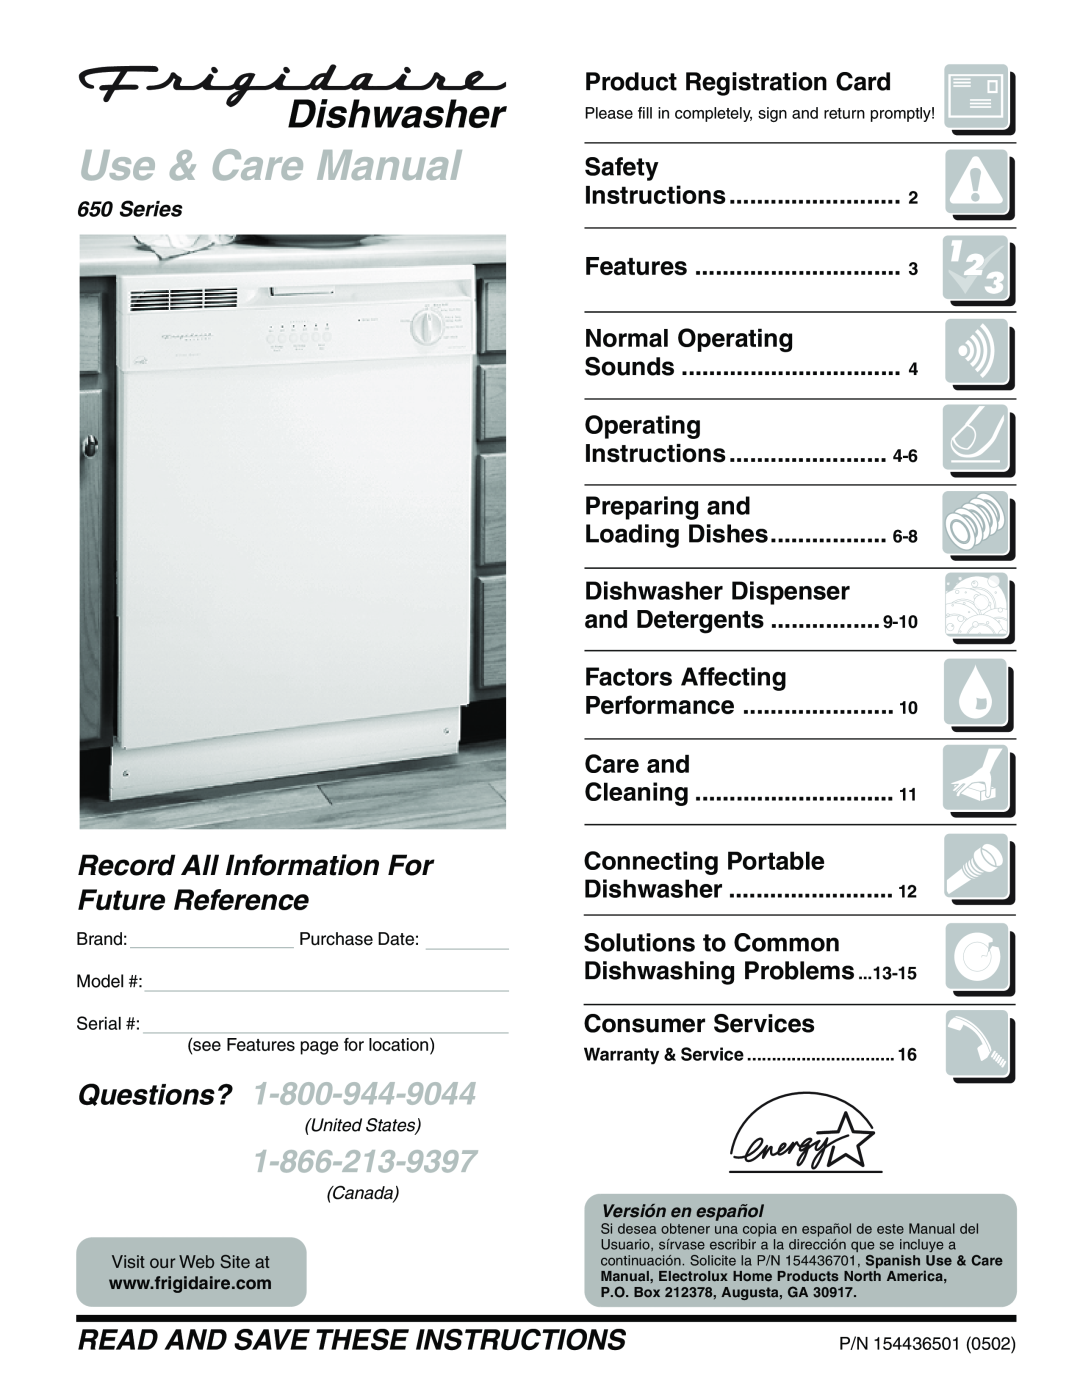 Frigidaire 650 Series warranty Product Registration Card, Safety, Normal Operating, Preparing and, Dishwasher Dispenser 